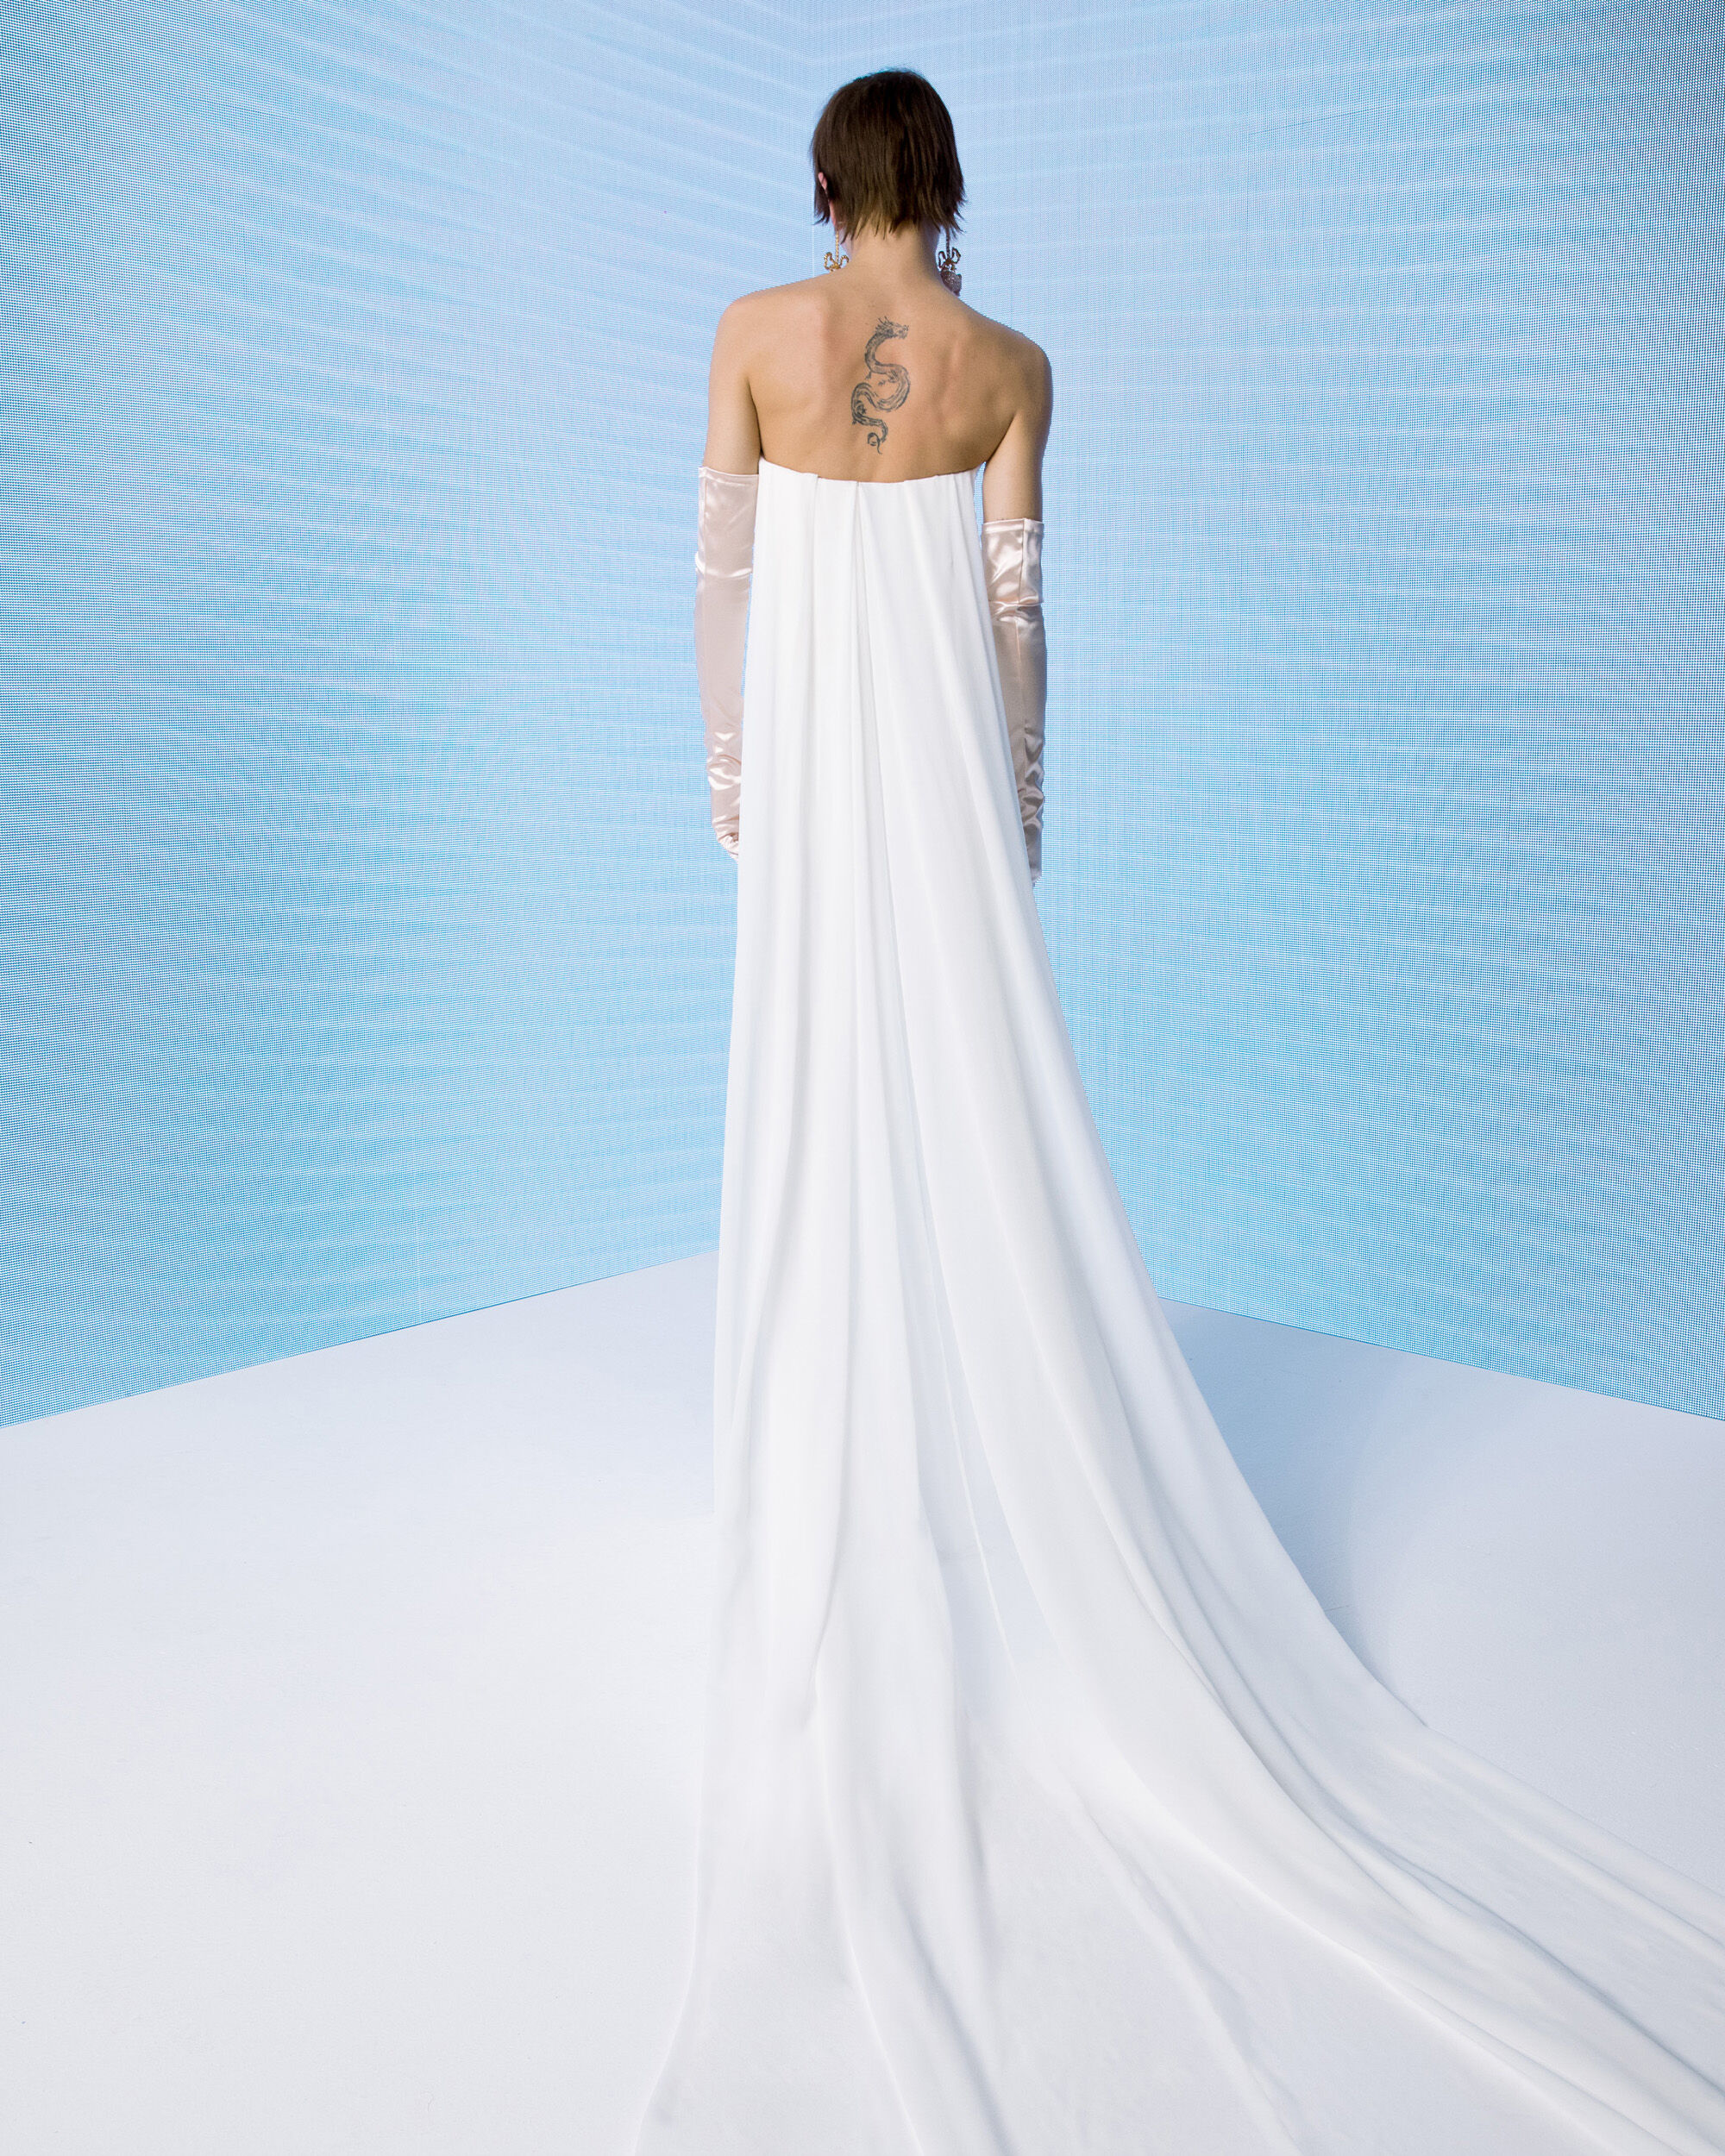 Galaxy Cape | Bridal Made to Order | Vivienne Westwood ®